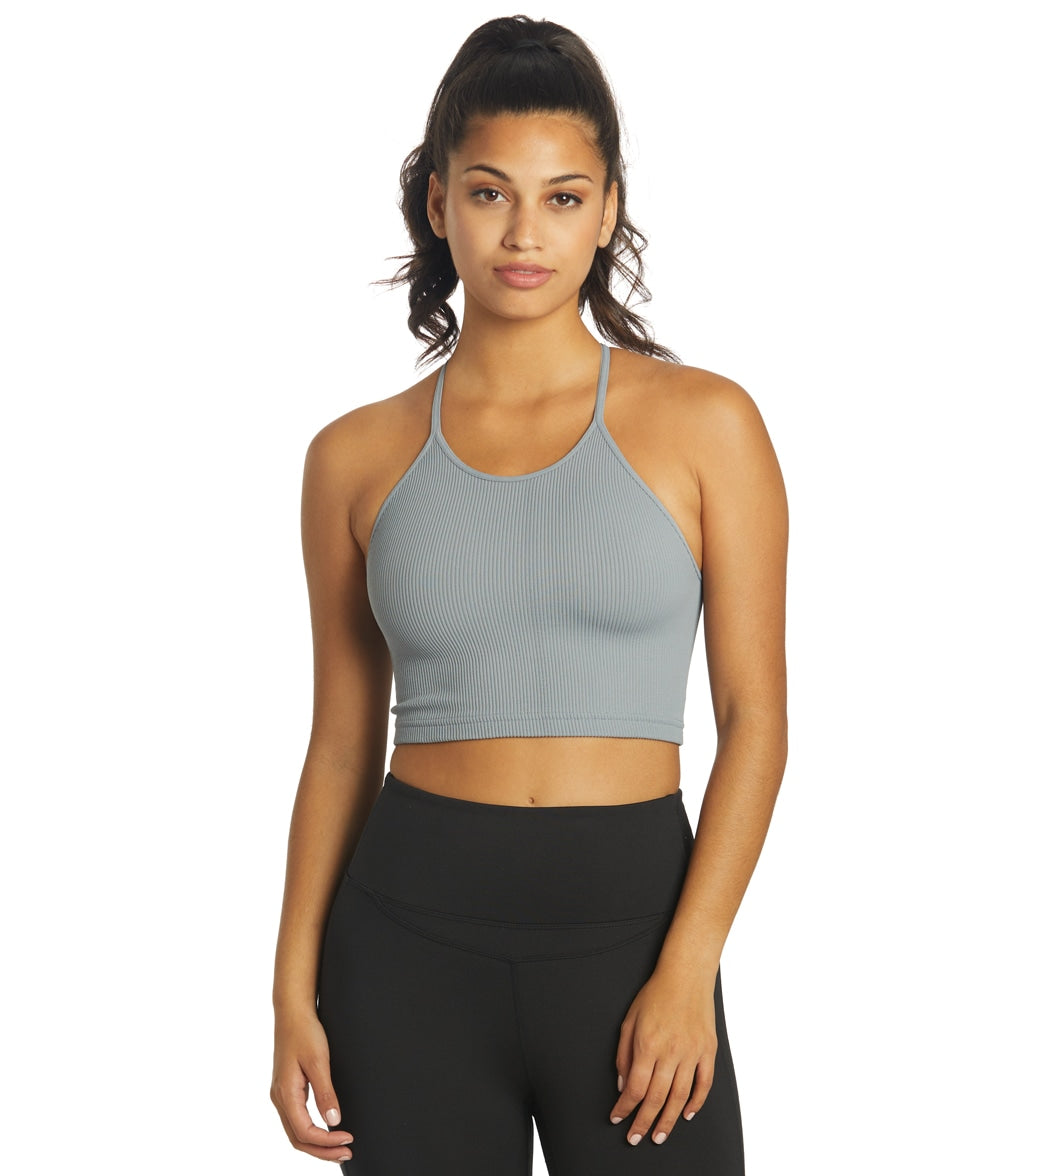 ANESHA Yoga Tank Tops for Women Built-in Shelf Bra C Cups Strappy Back  Activewear Workout Compression Tops Free Size (26 – 30) Pack of 1 Brown  Colour